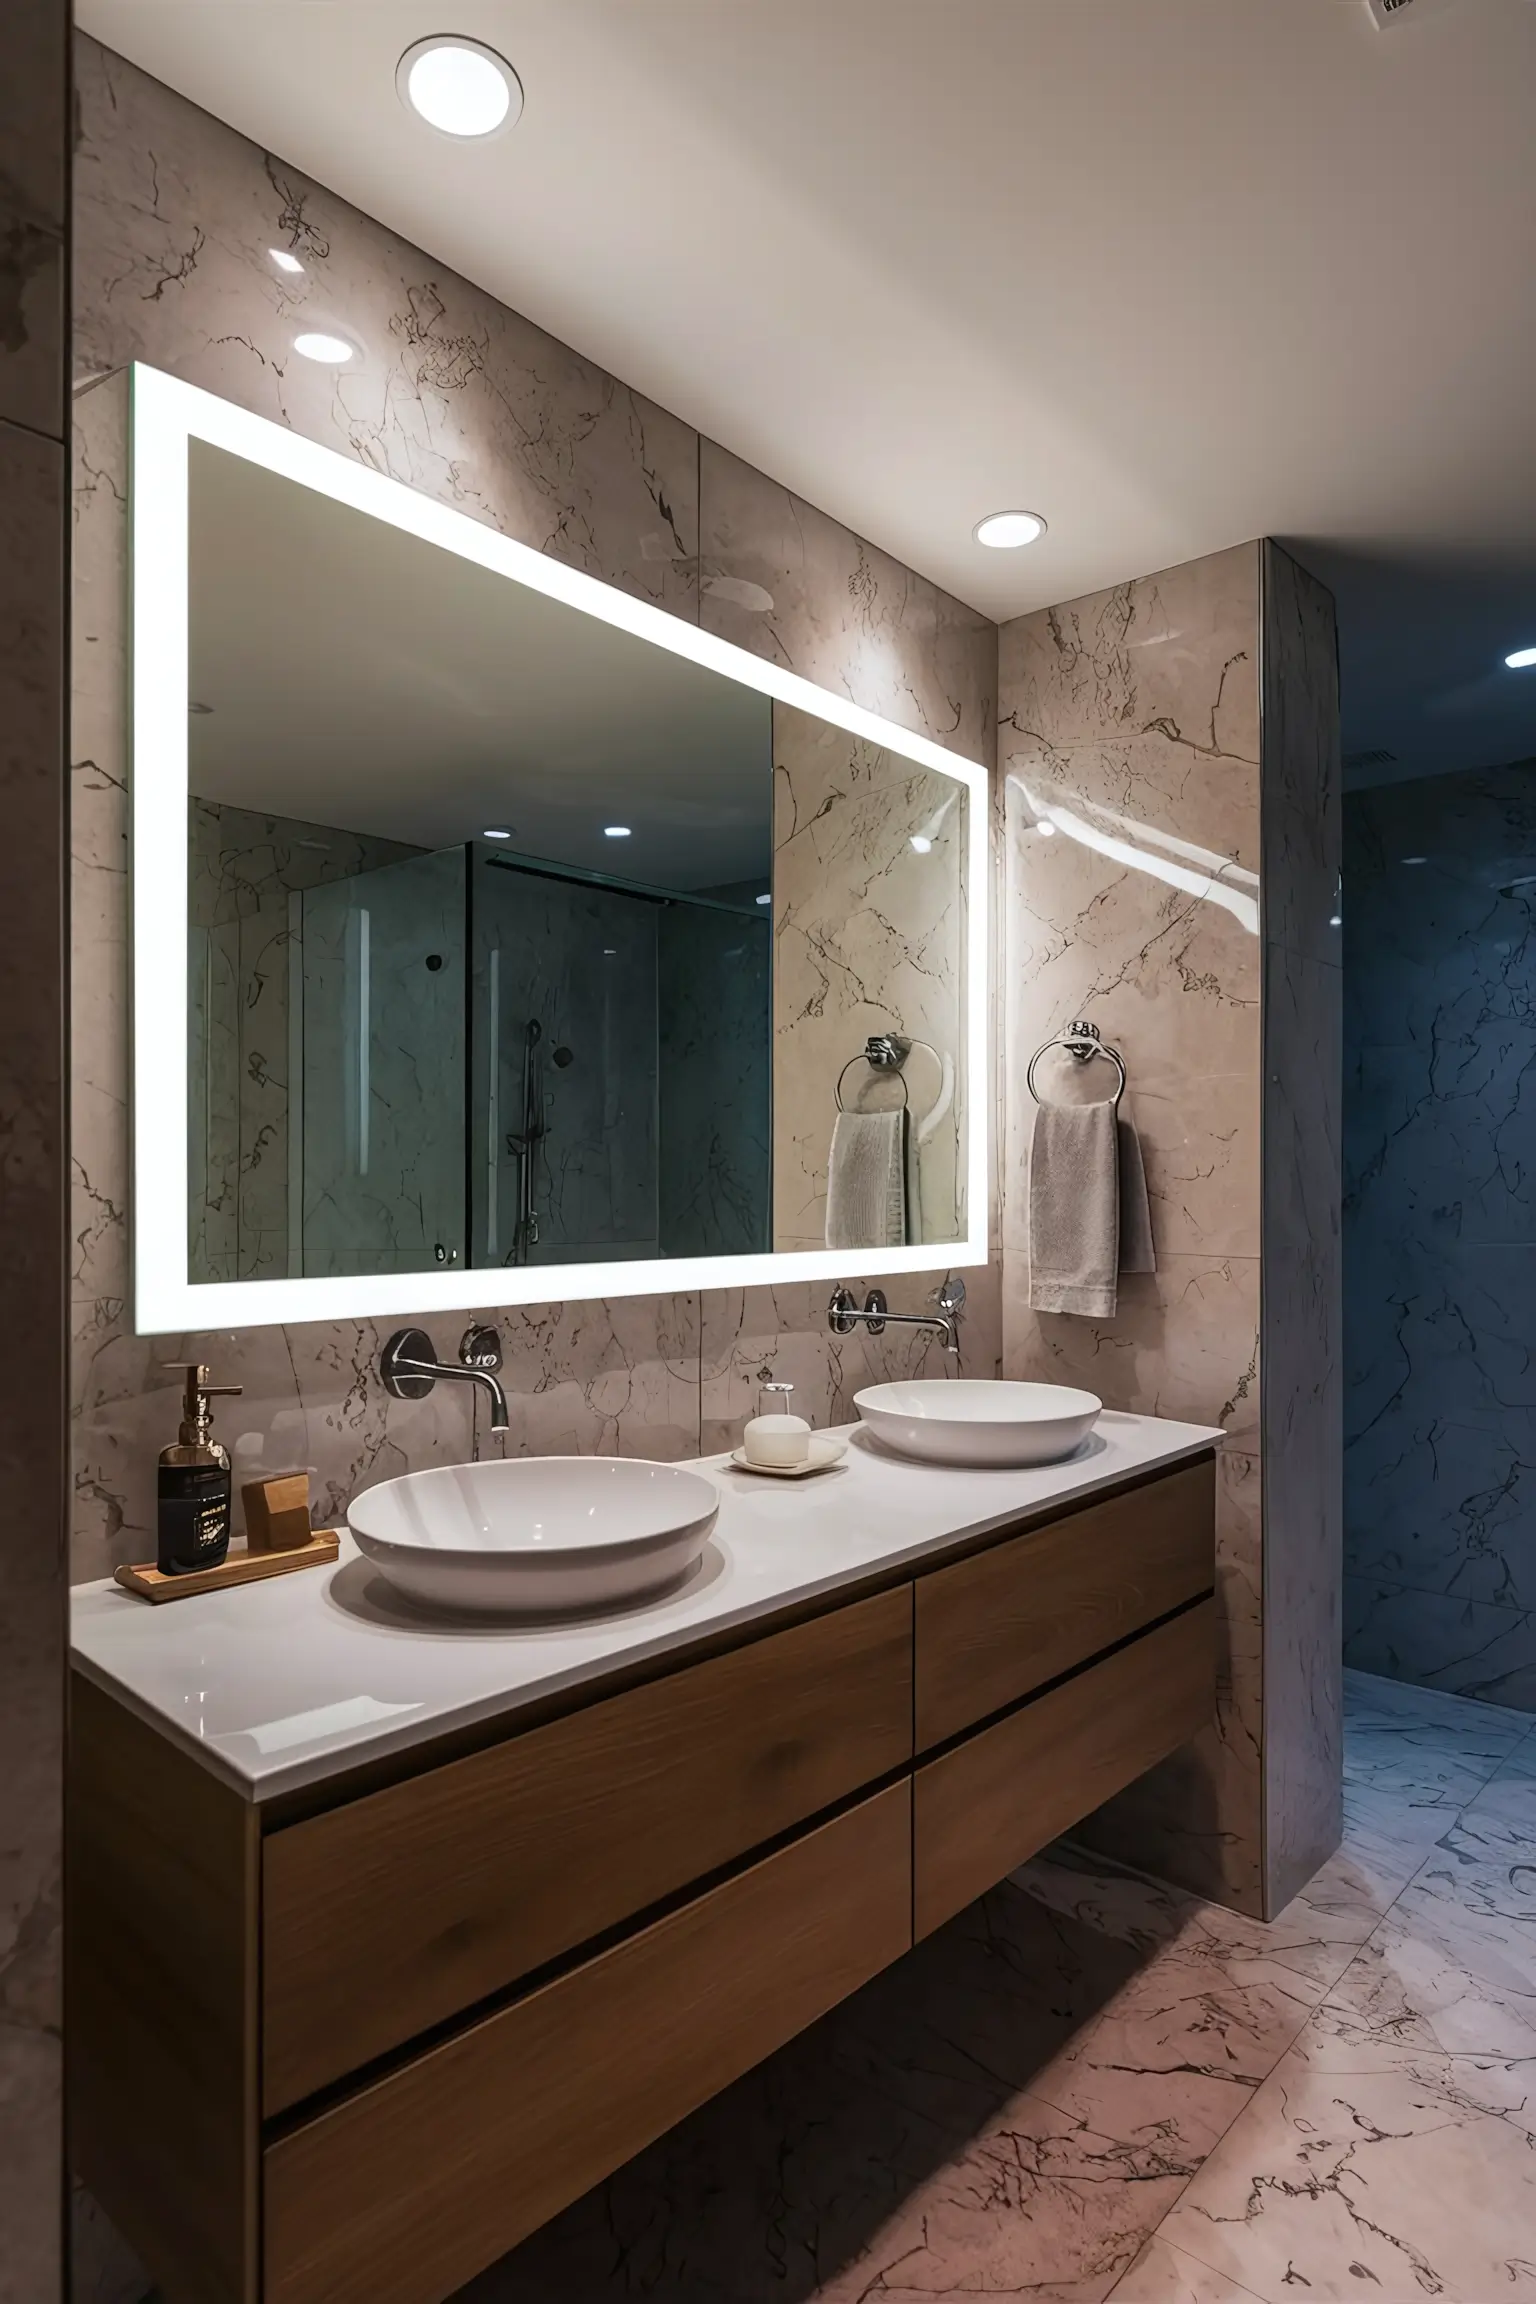 Bathroom mirror with integrated lighting featuring sleek LED lights around the edges.